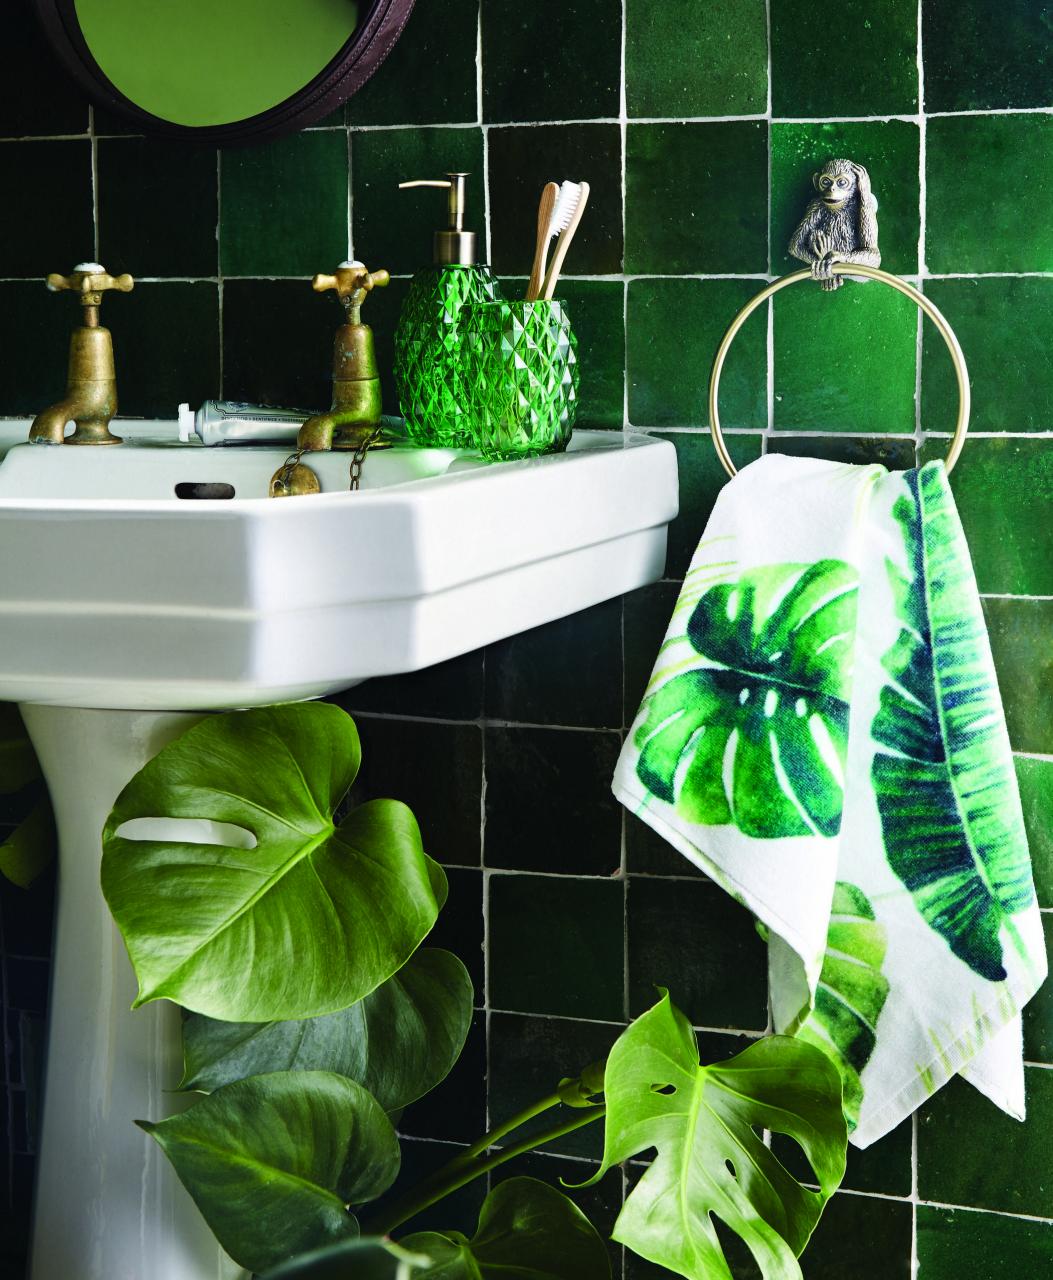 If you're looking to create a tropical themed bathroom then pair green